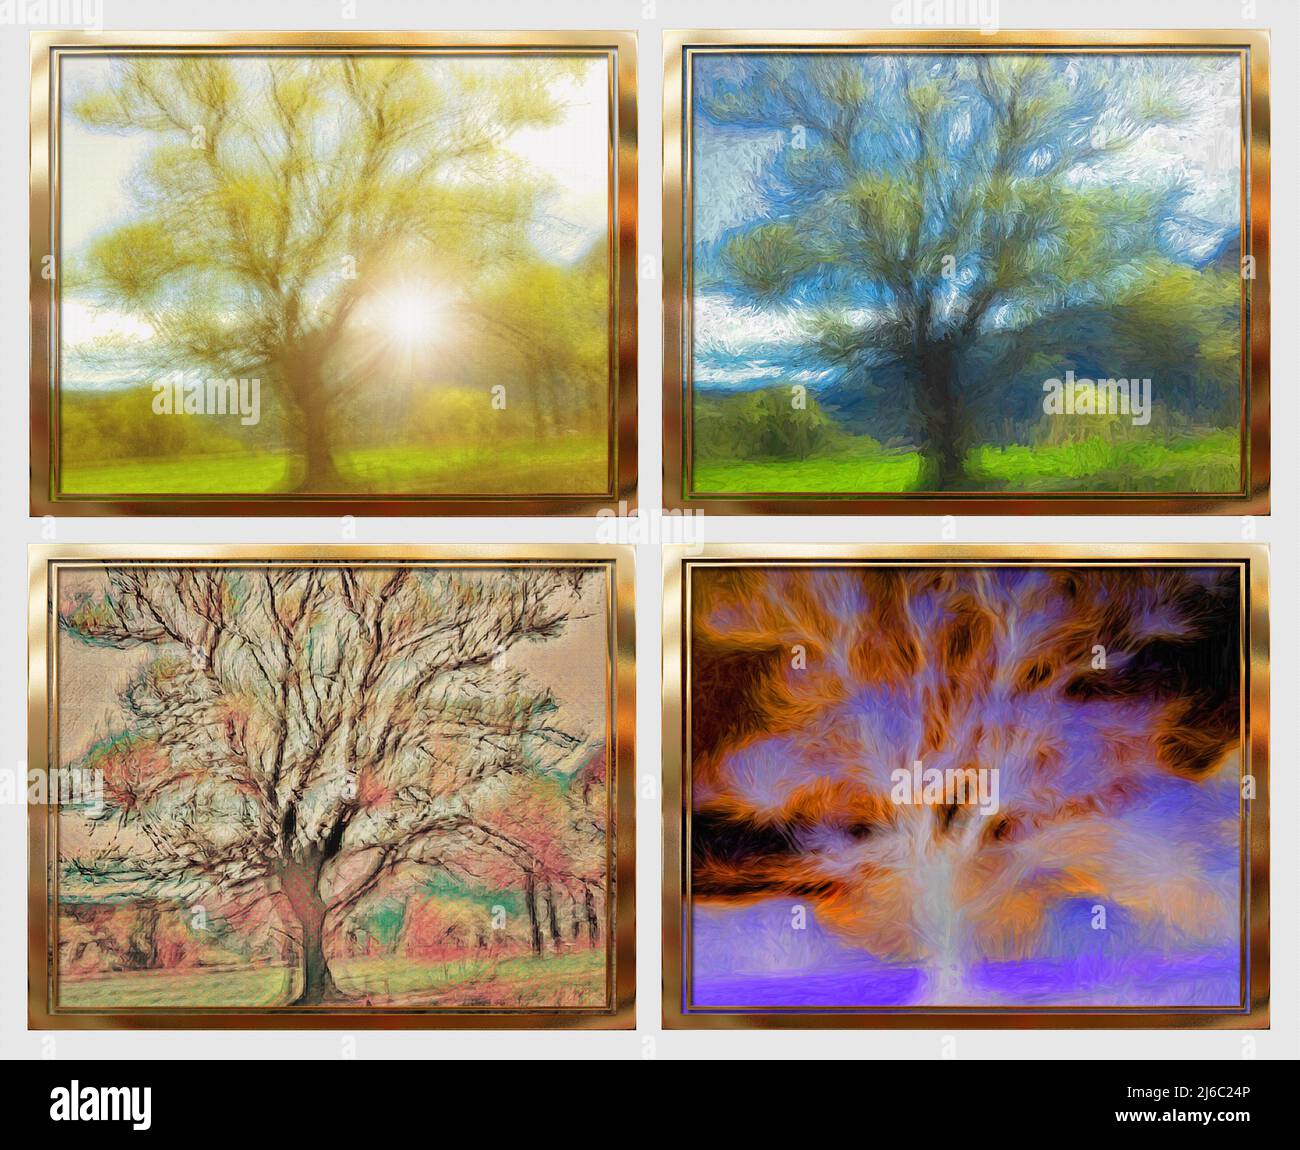 CONTEMPORARY ART: The Four Seasons in a single picture. High resolution allows images to be used separately for the price of one :-) Stock Photo